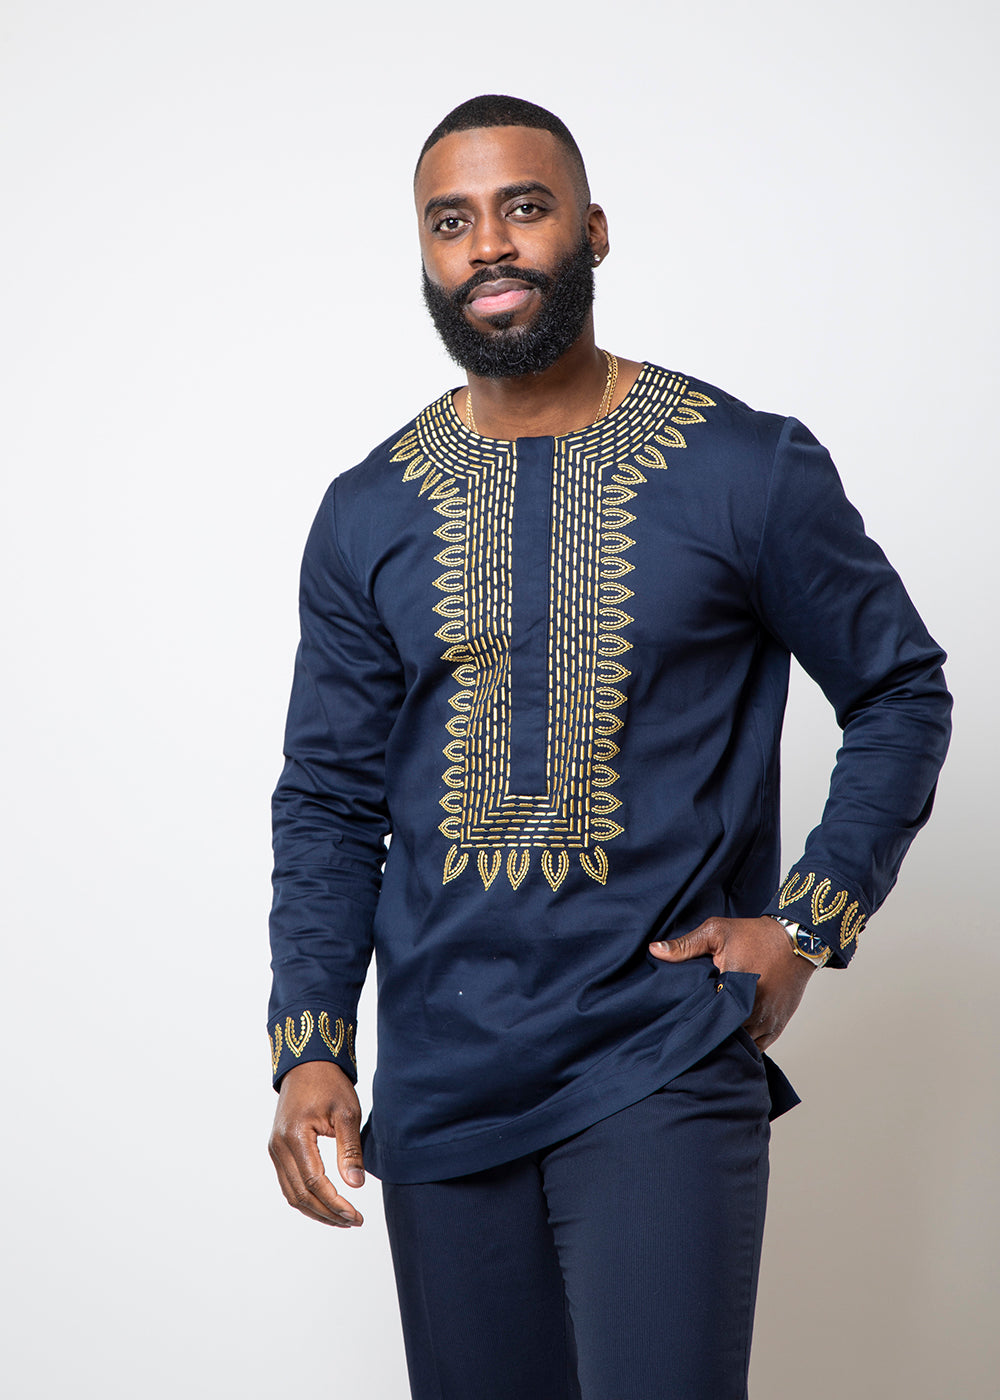 Karim Men's Embroidered Traditional Top Navy with Gold Embroidery – D'IYANU